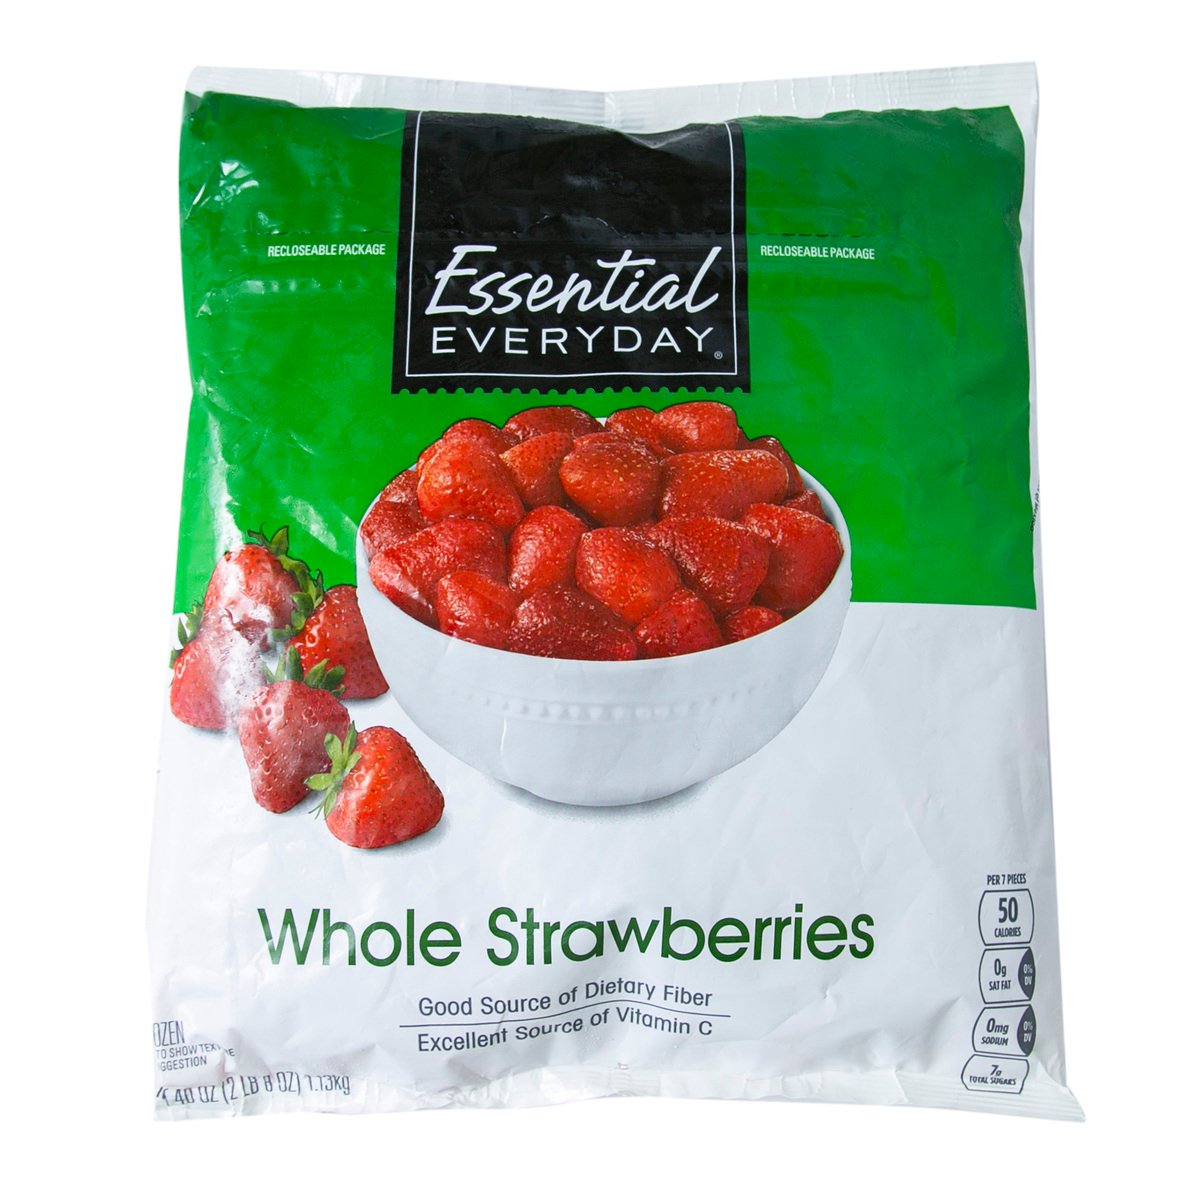 Essential Everyday Whole Strawberries 1.13 kg